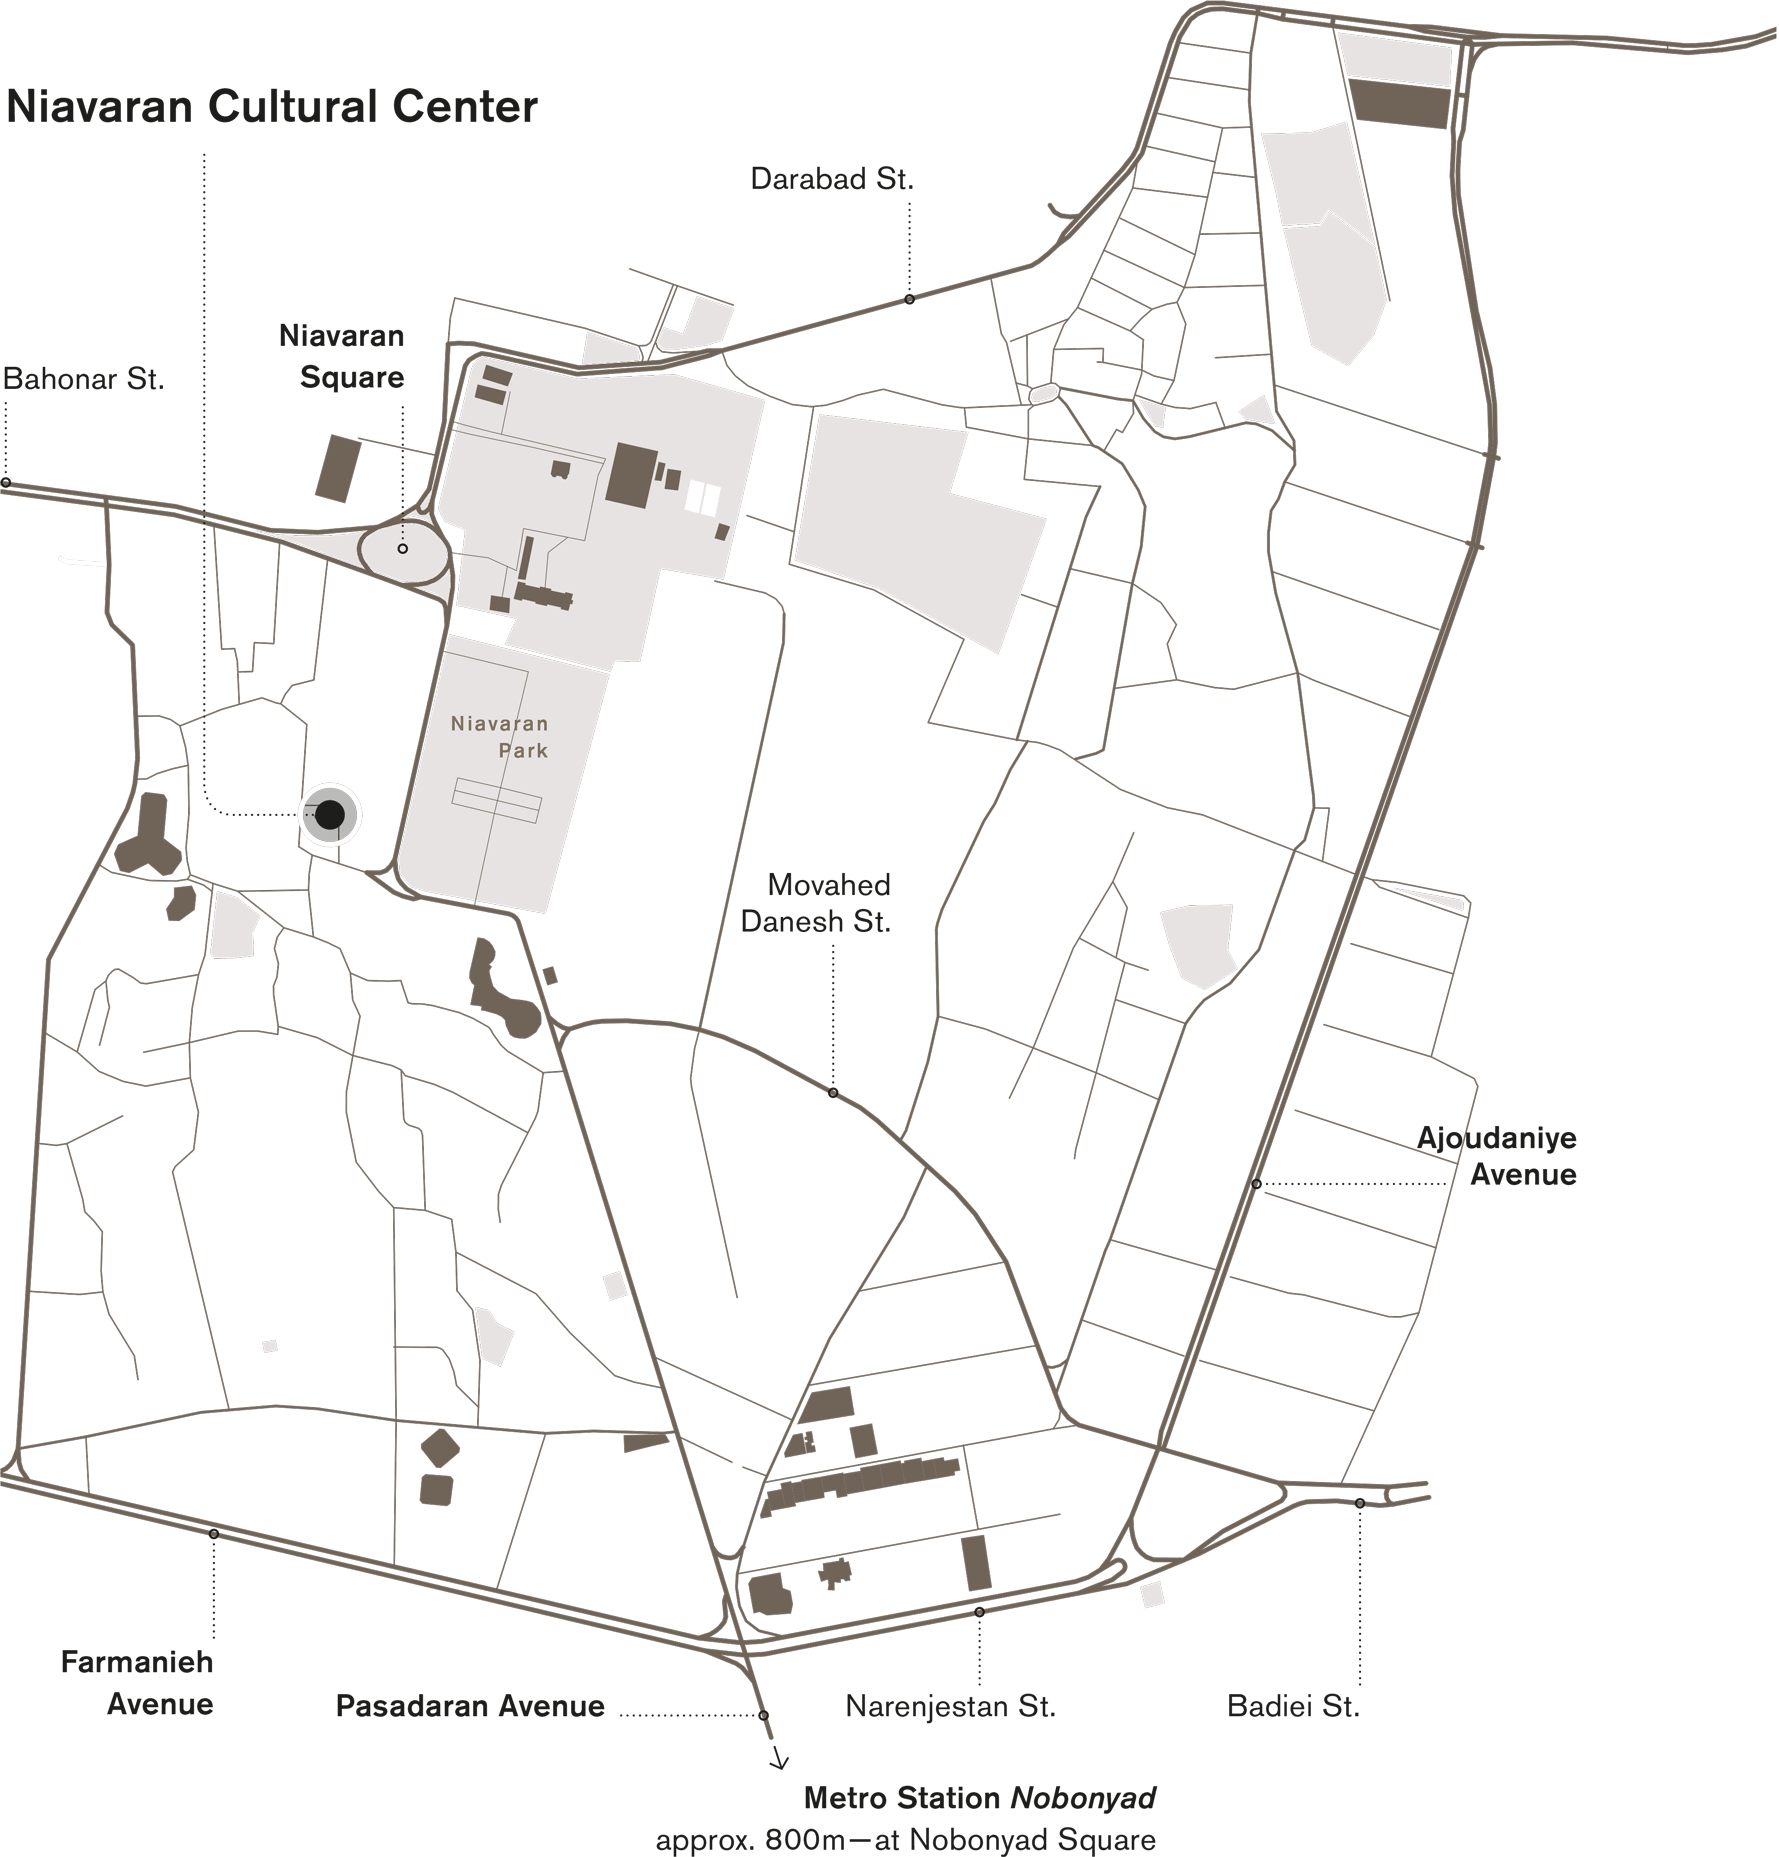 Illustrated Map of the location of the Designing in Dialogue exhibition by gmp in Tehran